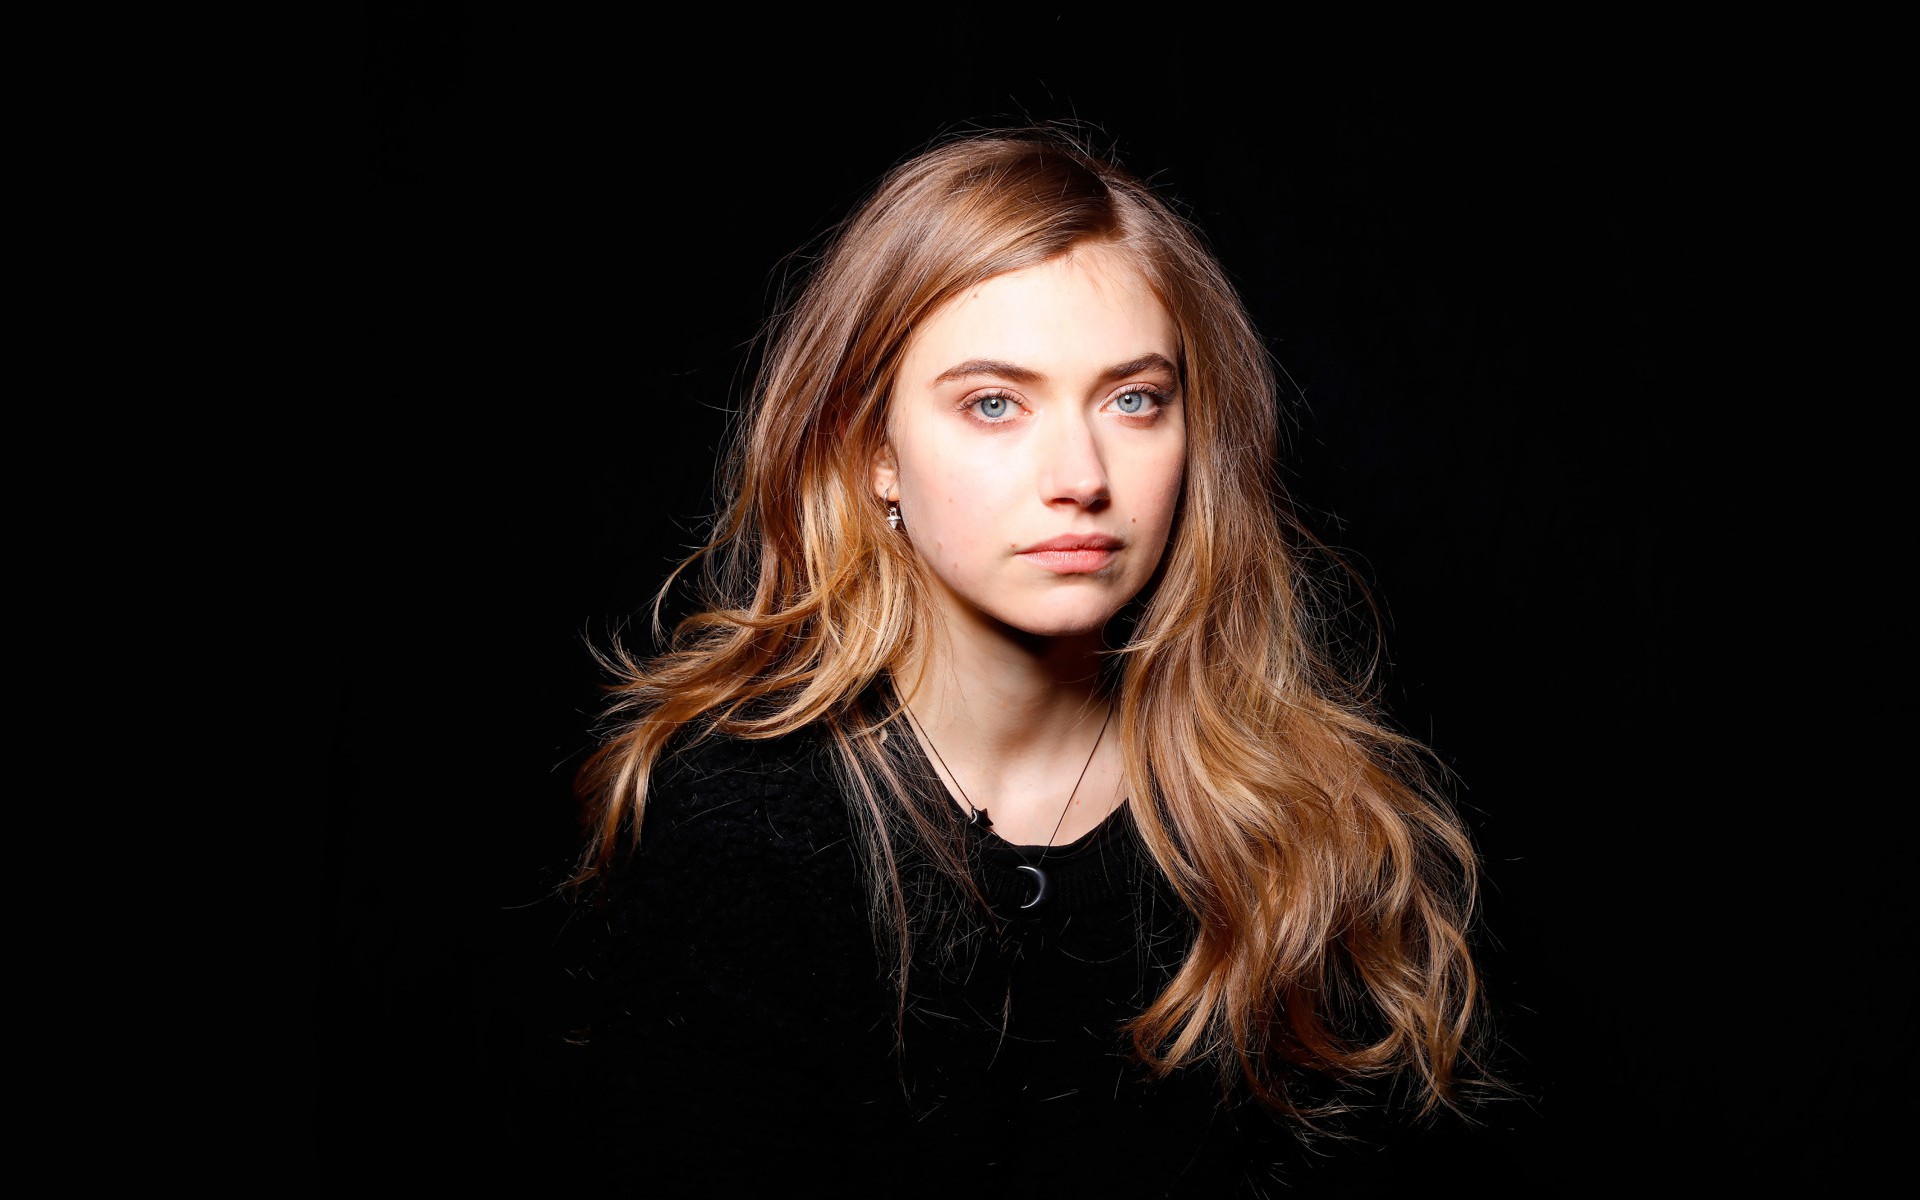 imogen poots face free awesome image for mobile